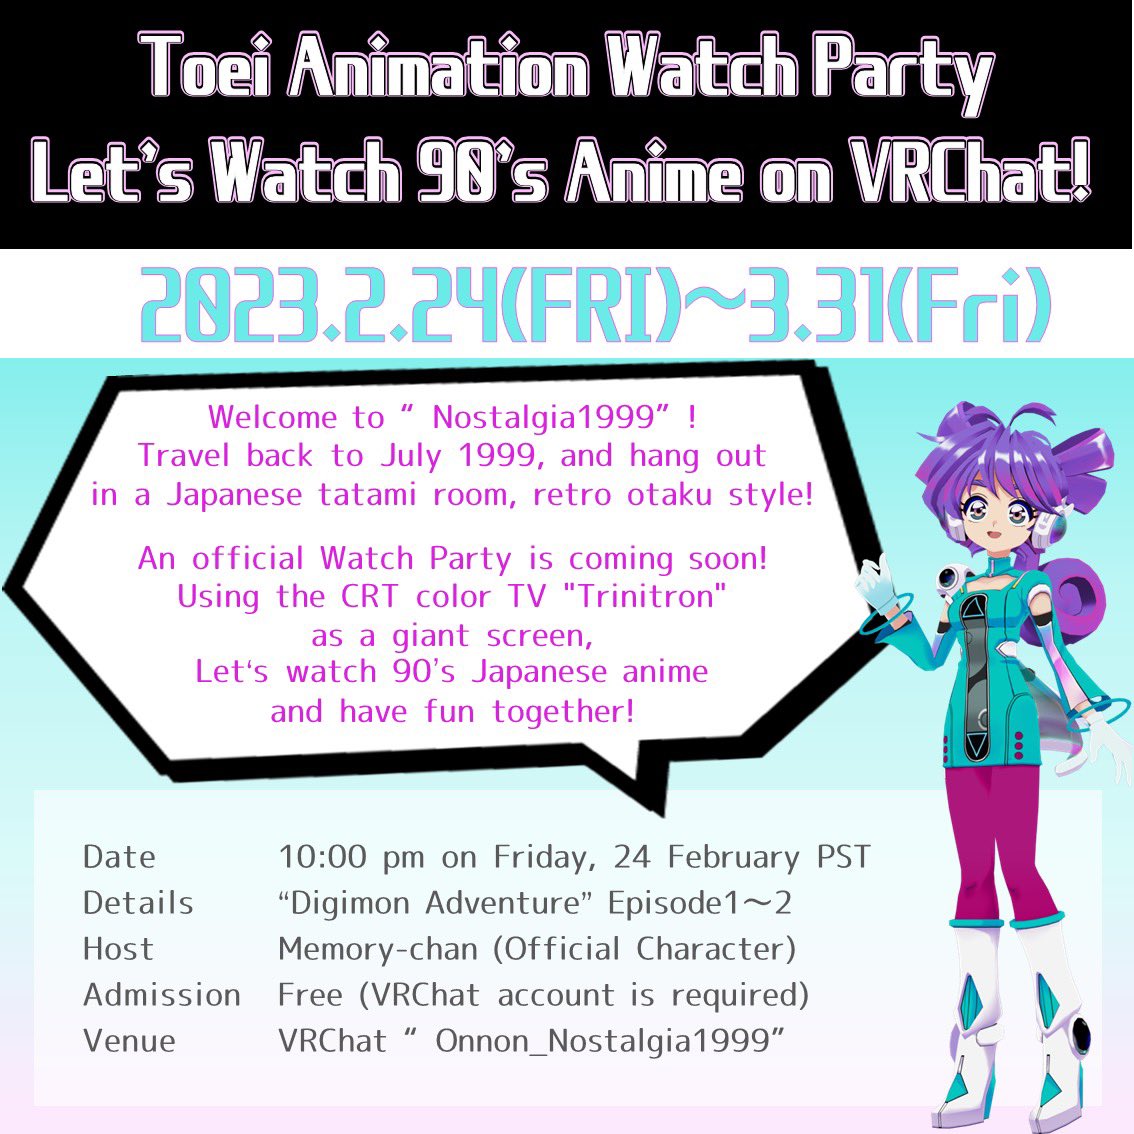 Sony to Debut Anime Studio with VRChat Watch Party - XR Today